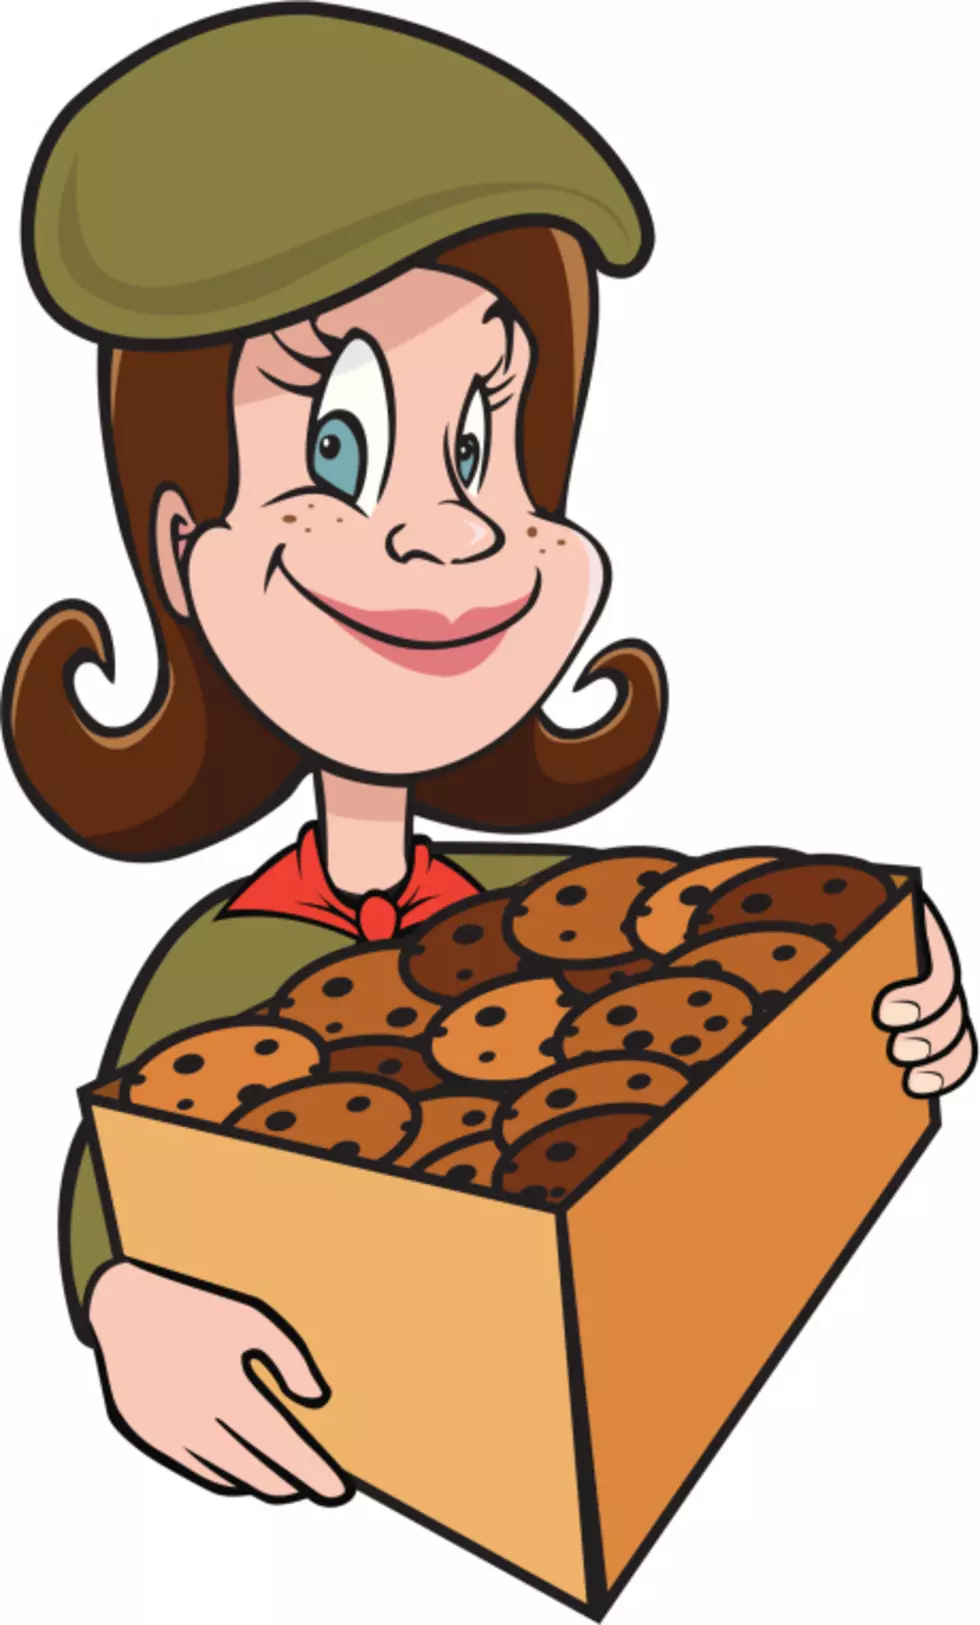 What&#8217;s Your Favorite Girl Scout Cookie? [POLL]